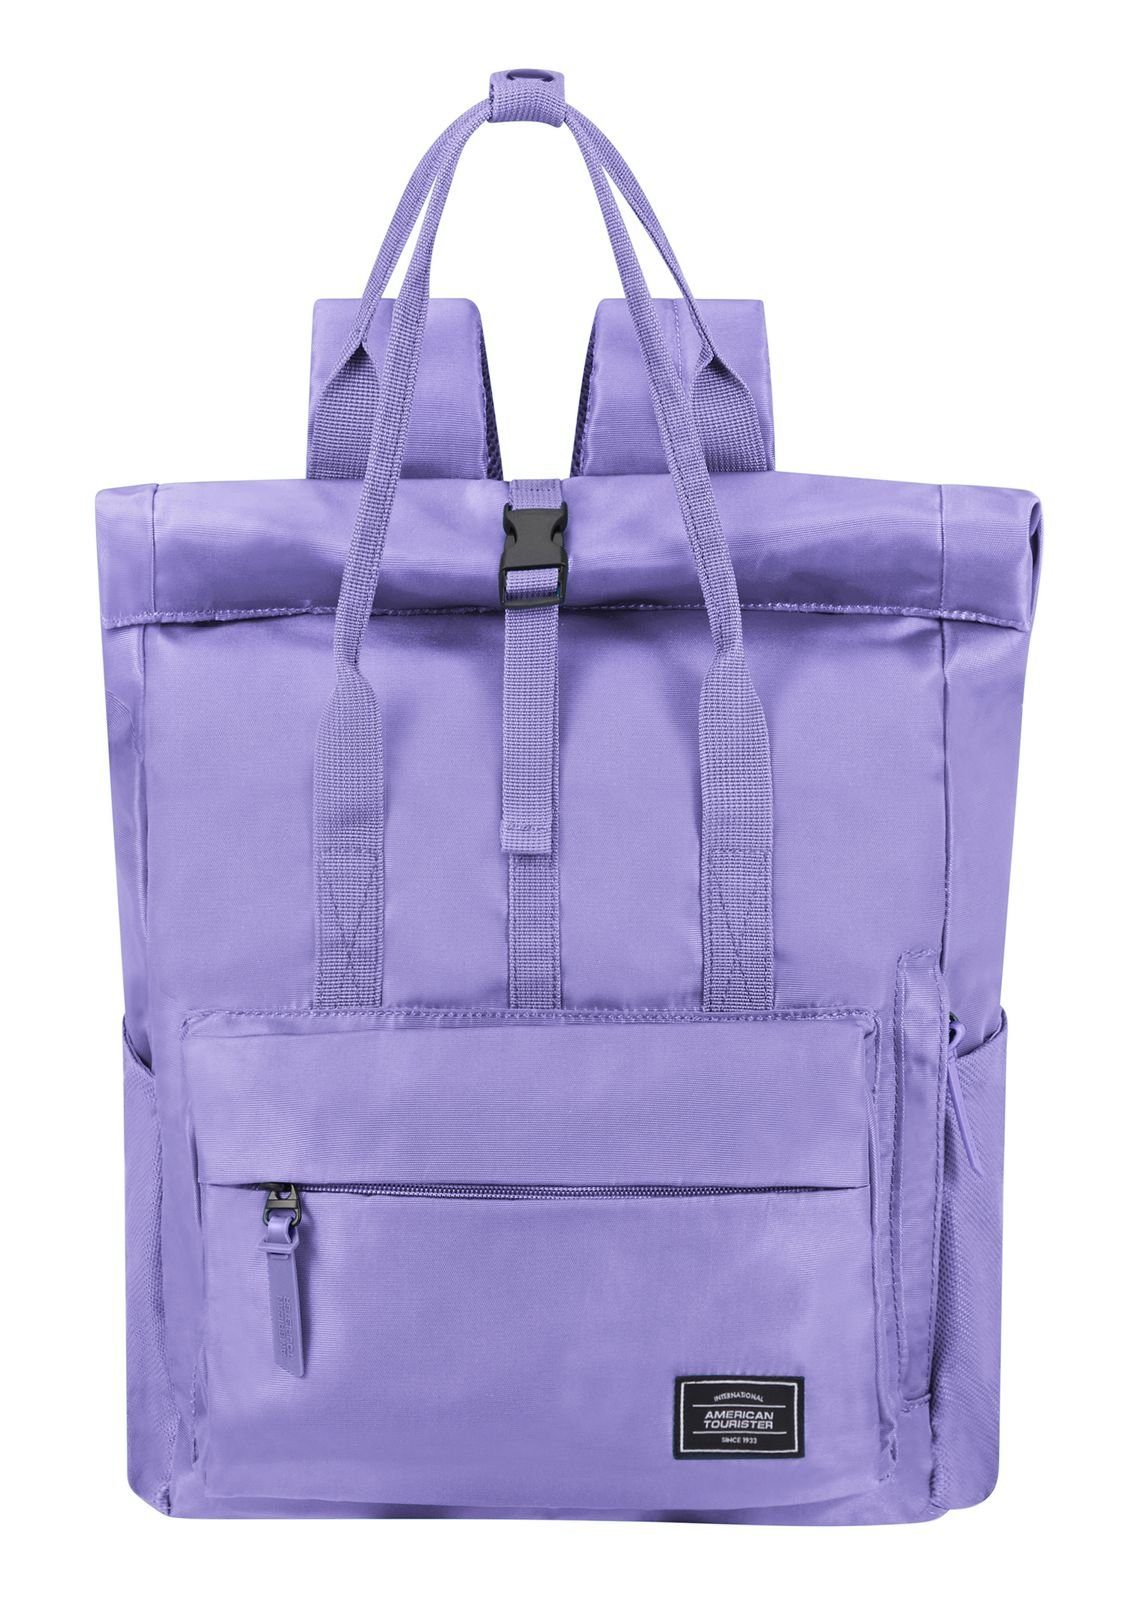 American Tourister® Rucksack Urban Groove Soft Lilac